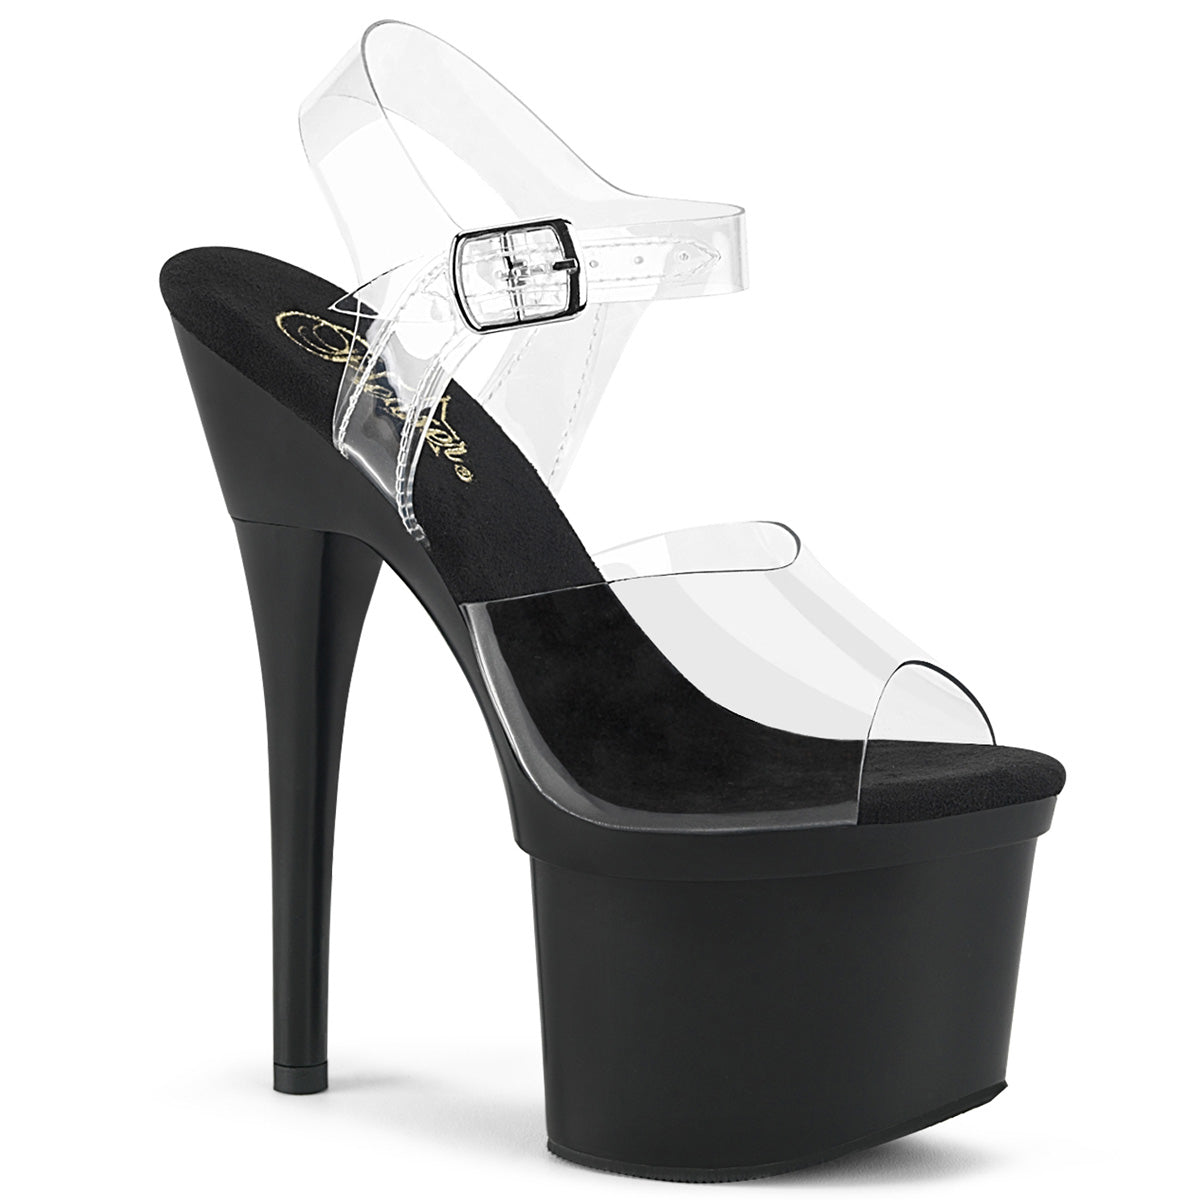 ESTEEM-708 7" Heel Clear and Black Pole Dancing -Pleaser- Sexy Shoes